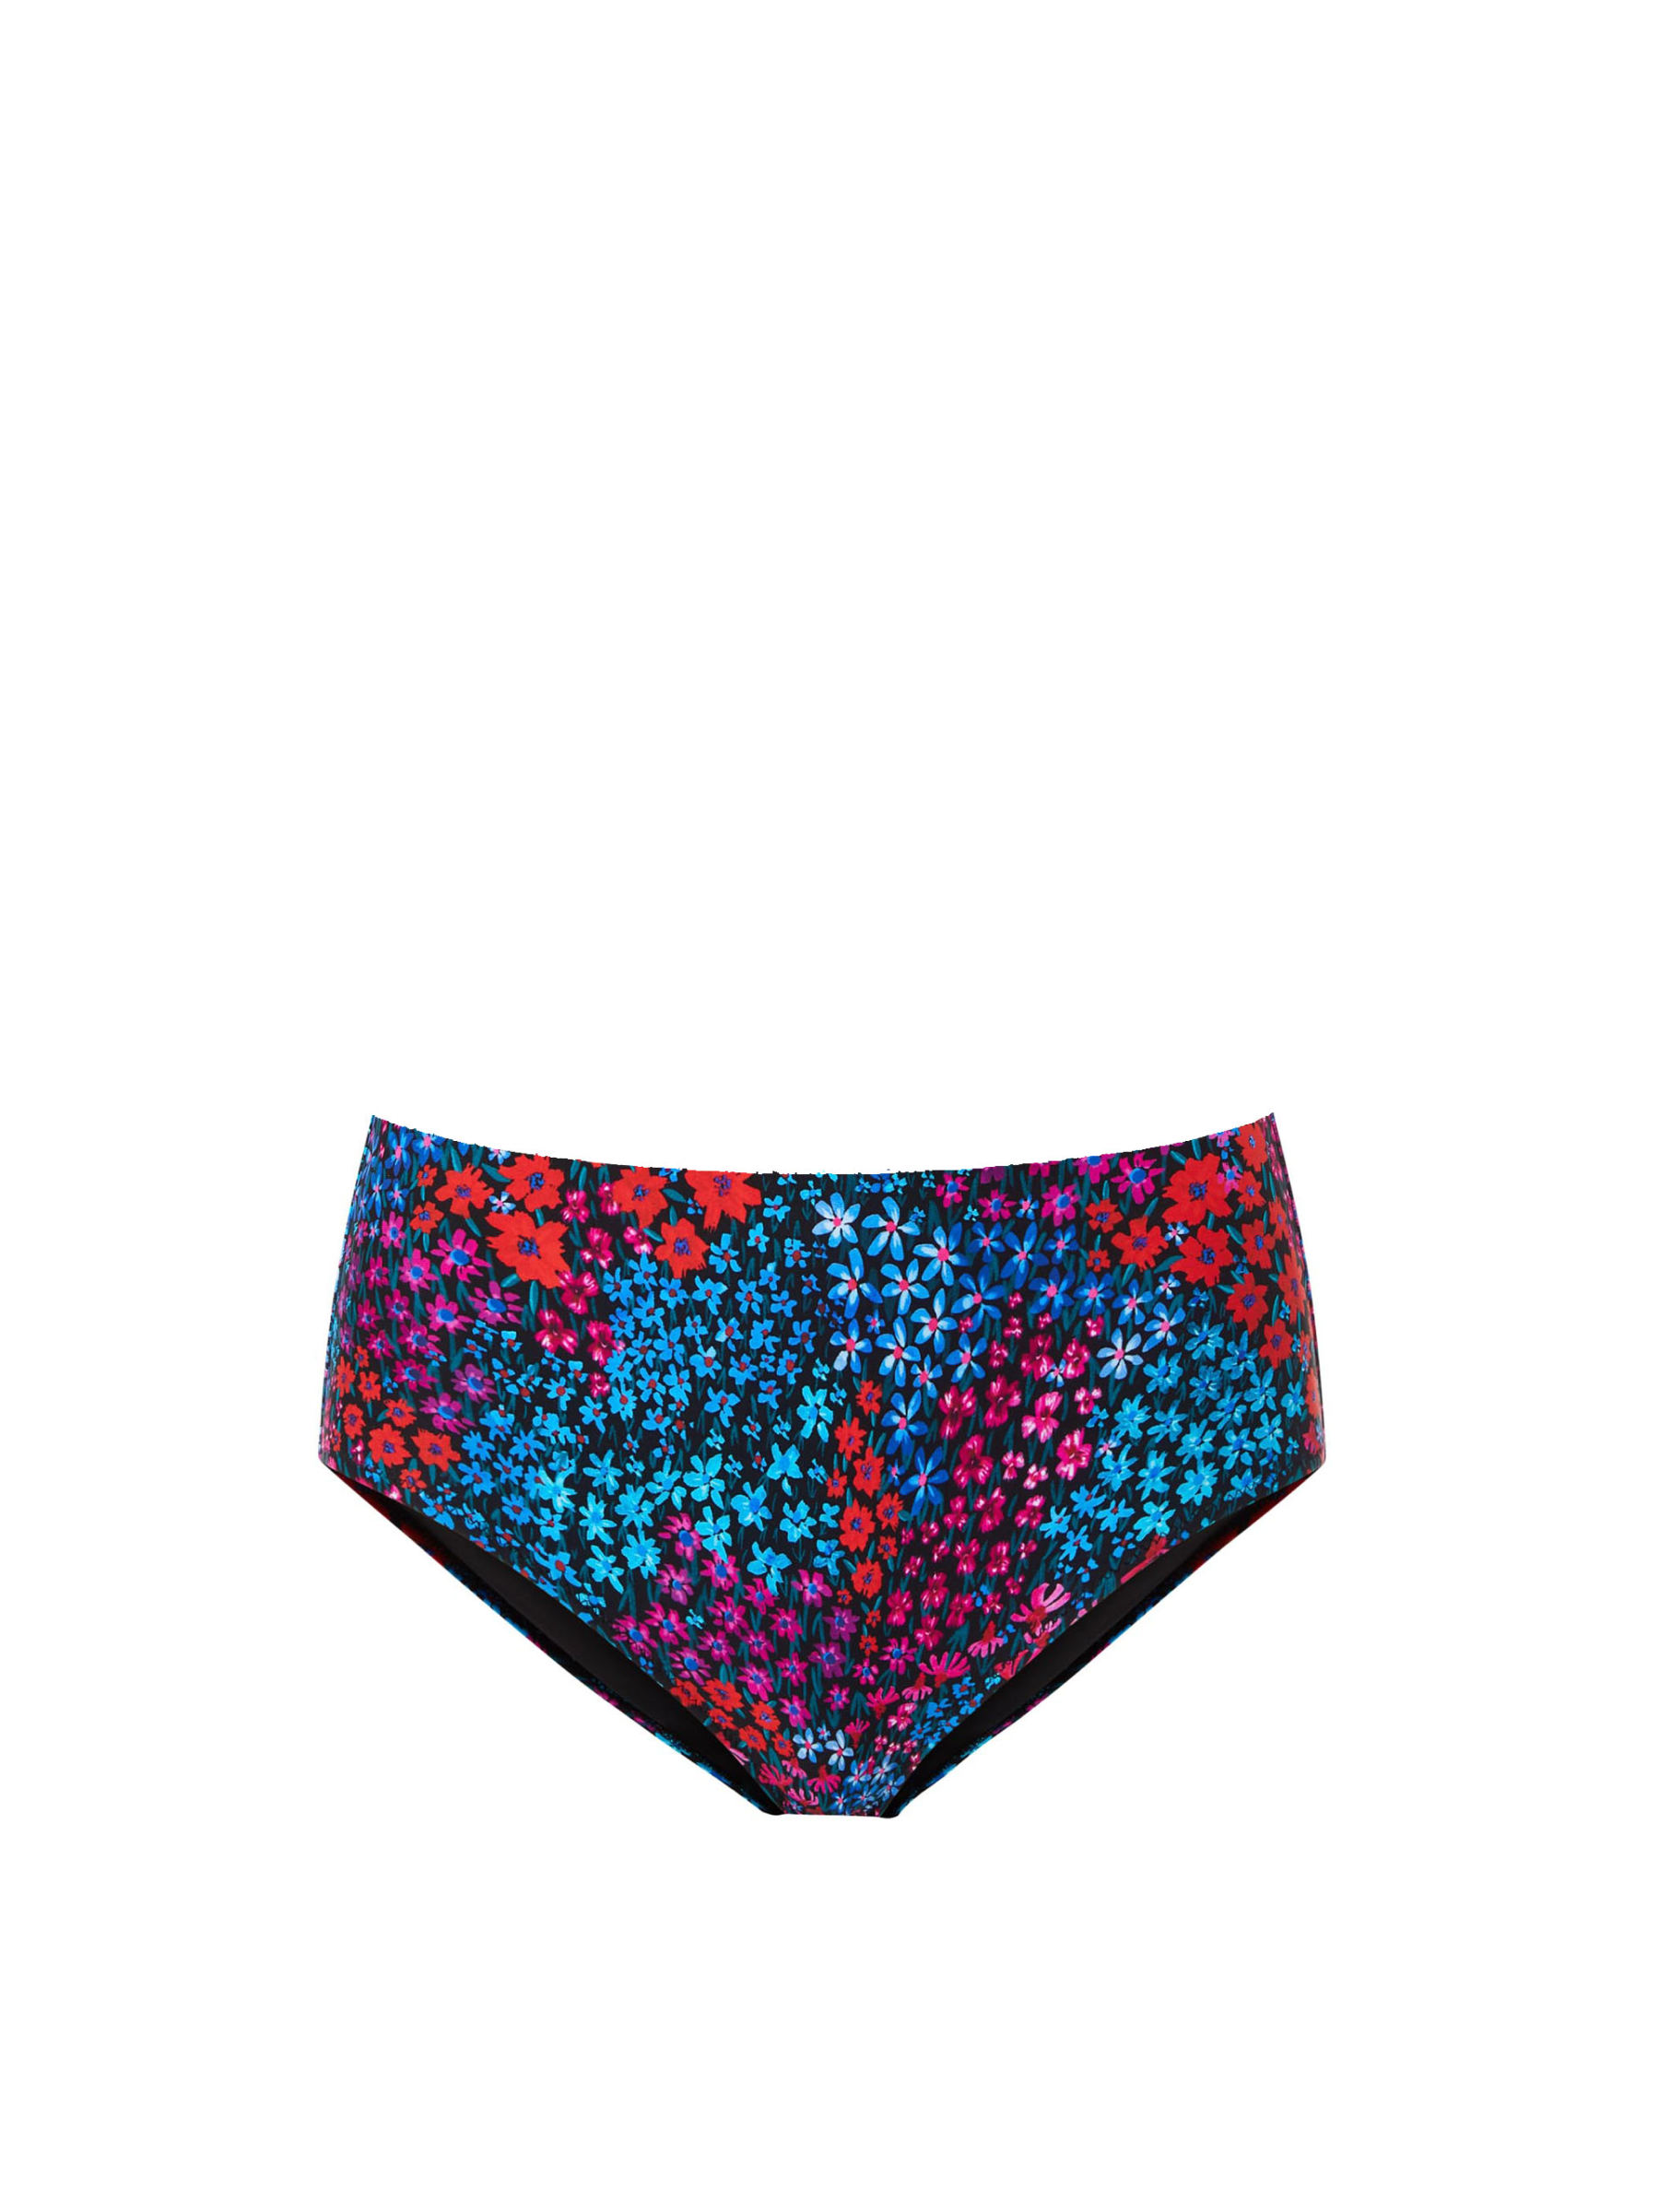 Women’s Pink / Purple / Blue Classic Midrise Bottom In Bloom Extra Small Change of Scenery